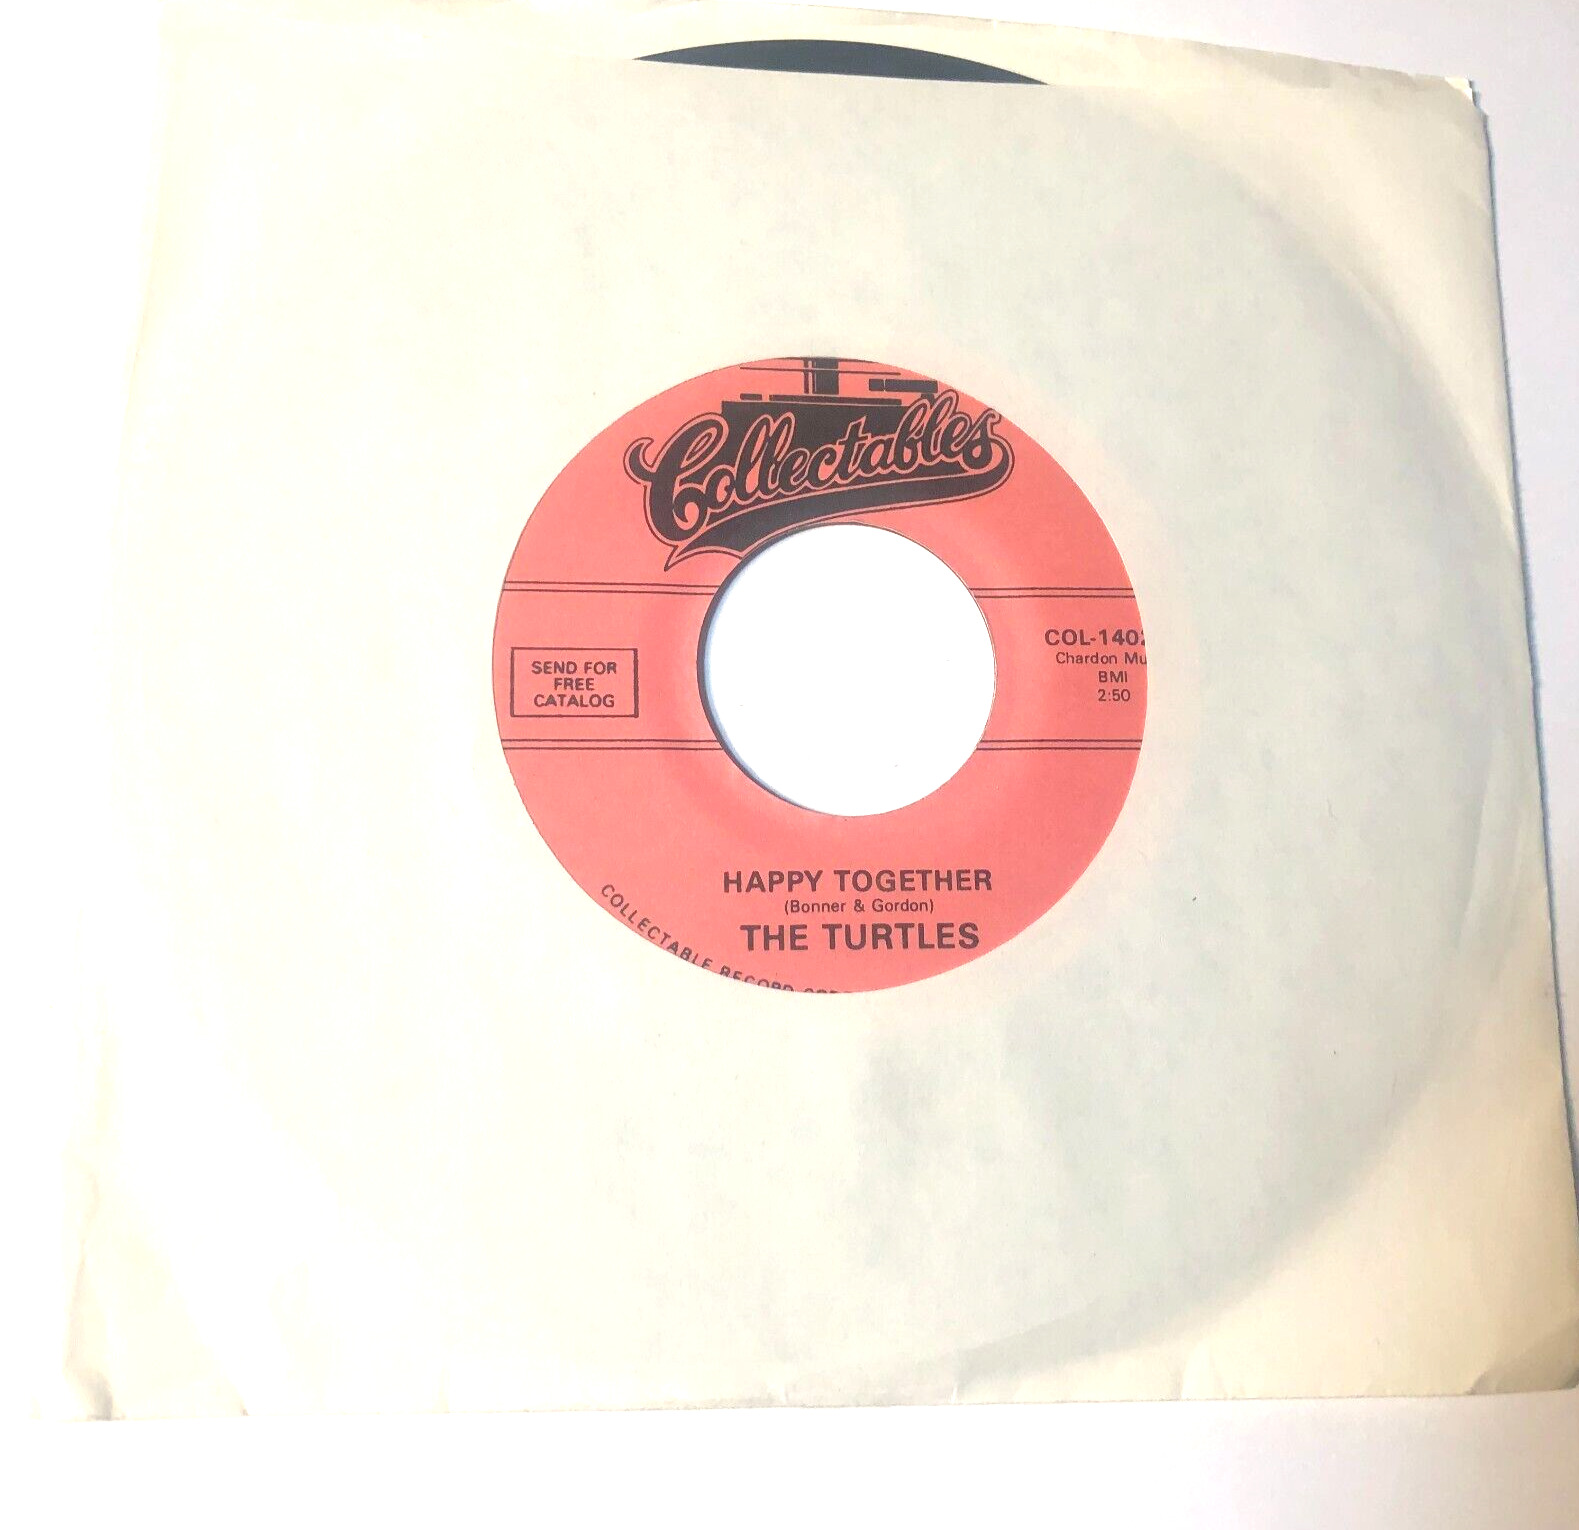 The Turtles  7" Record 45 Happy Together / The Walking Song  collectables label